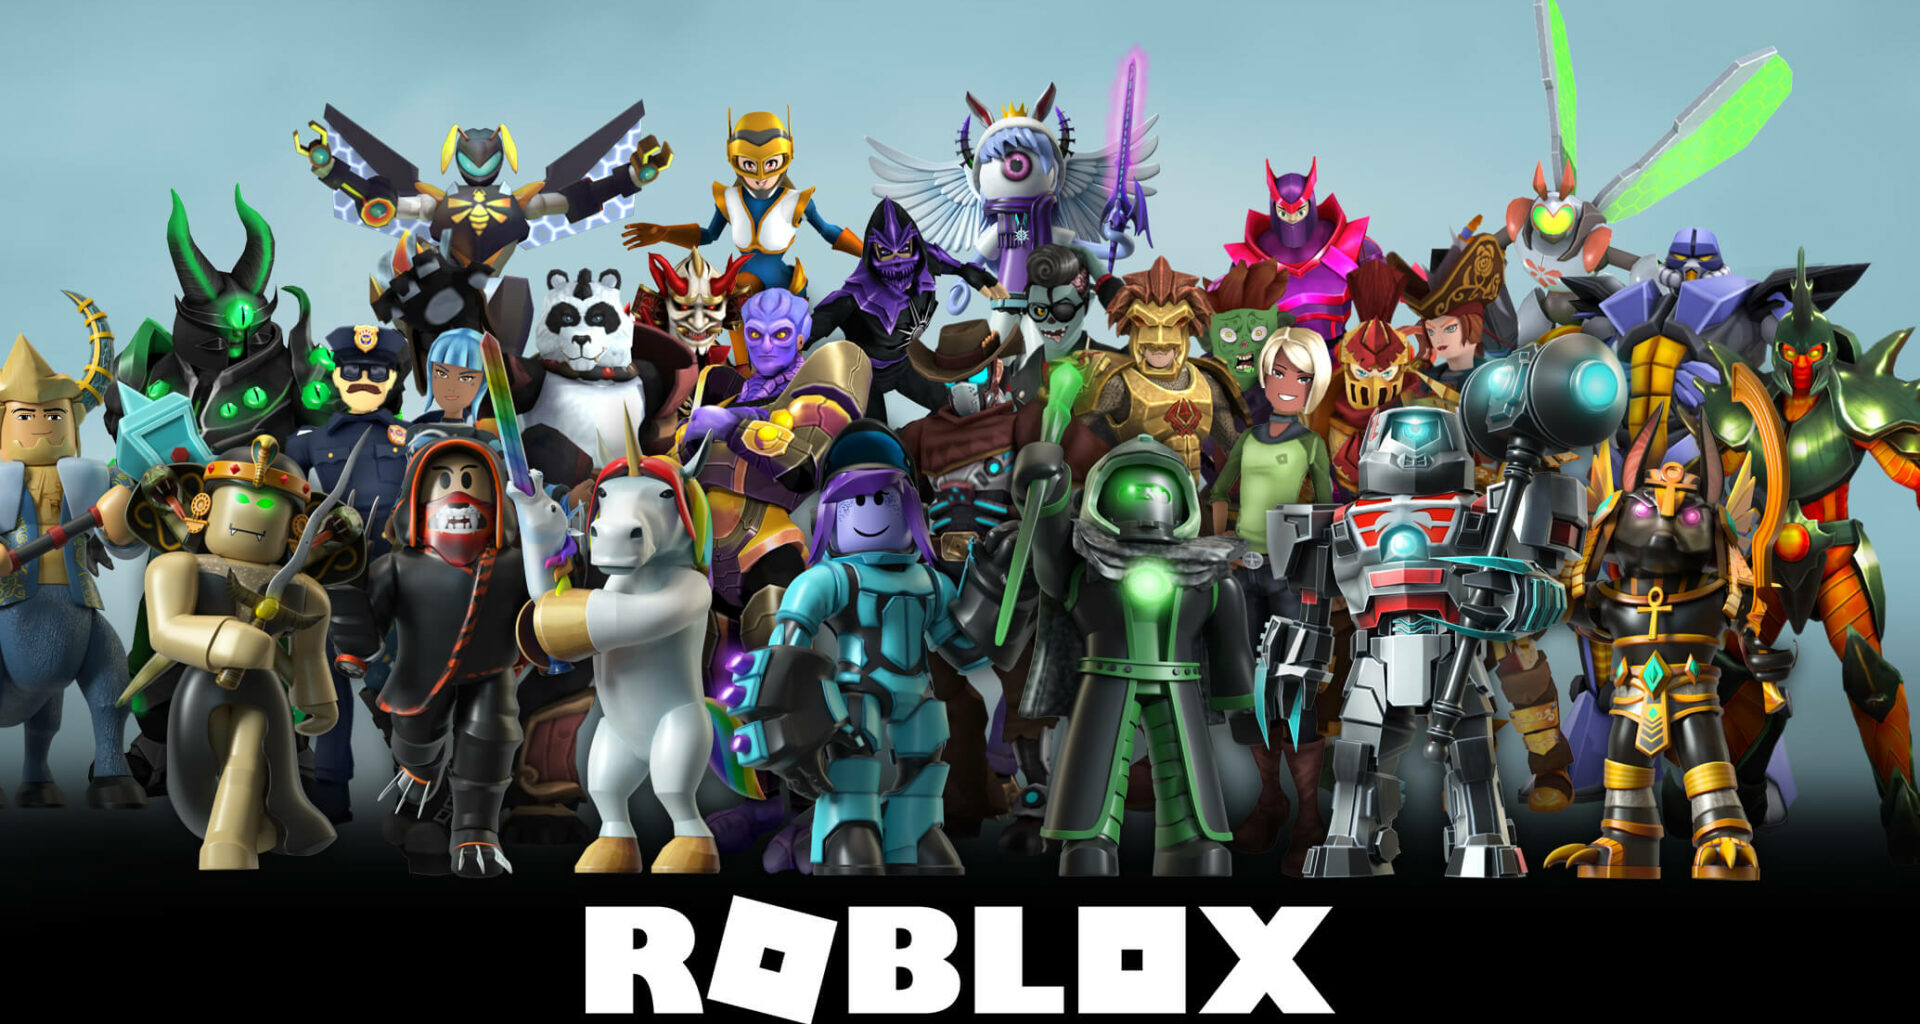 Download Roblox Apk For Free If You Can T Get Minecraft Apk Legally - roblox mobile installer